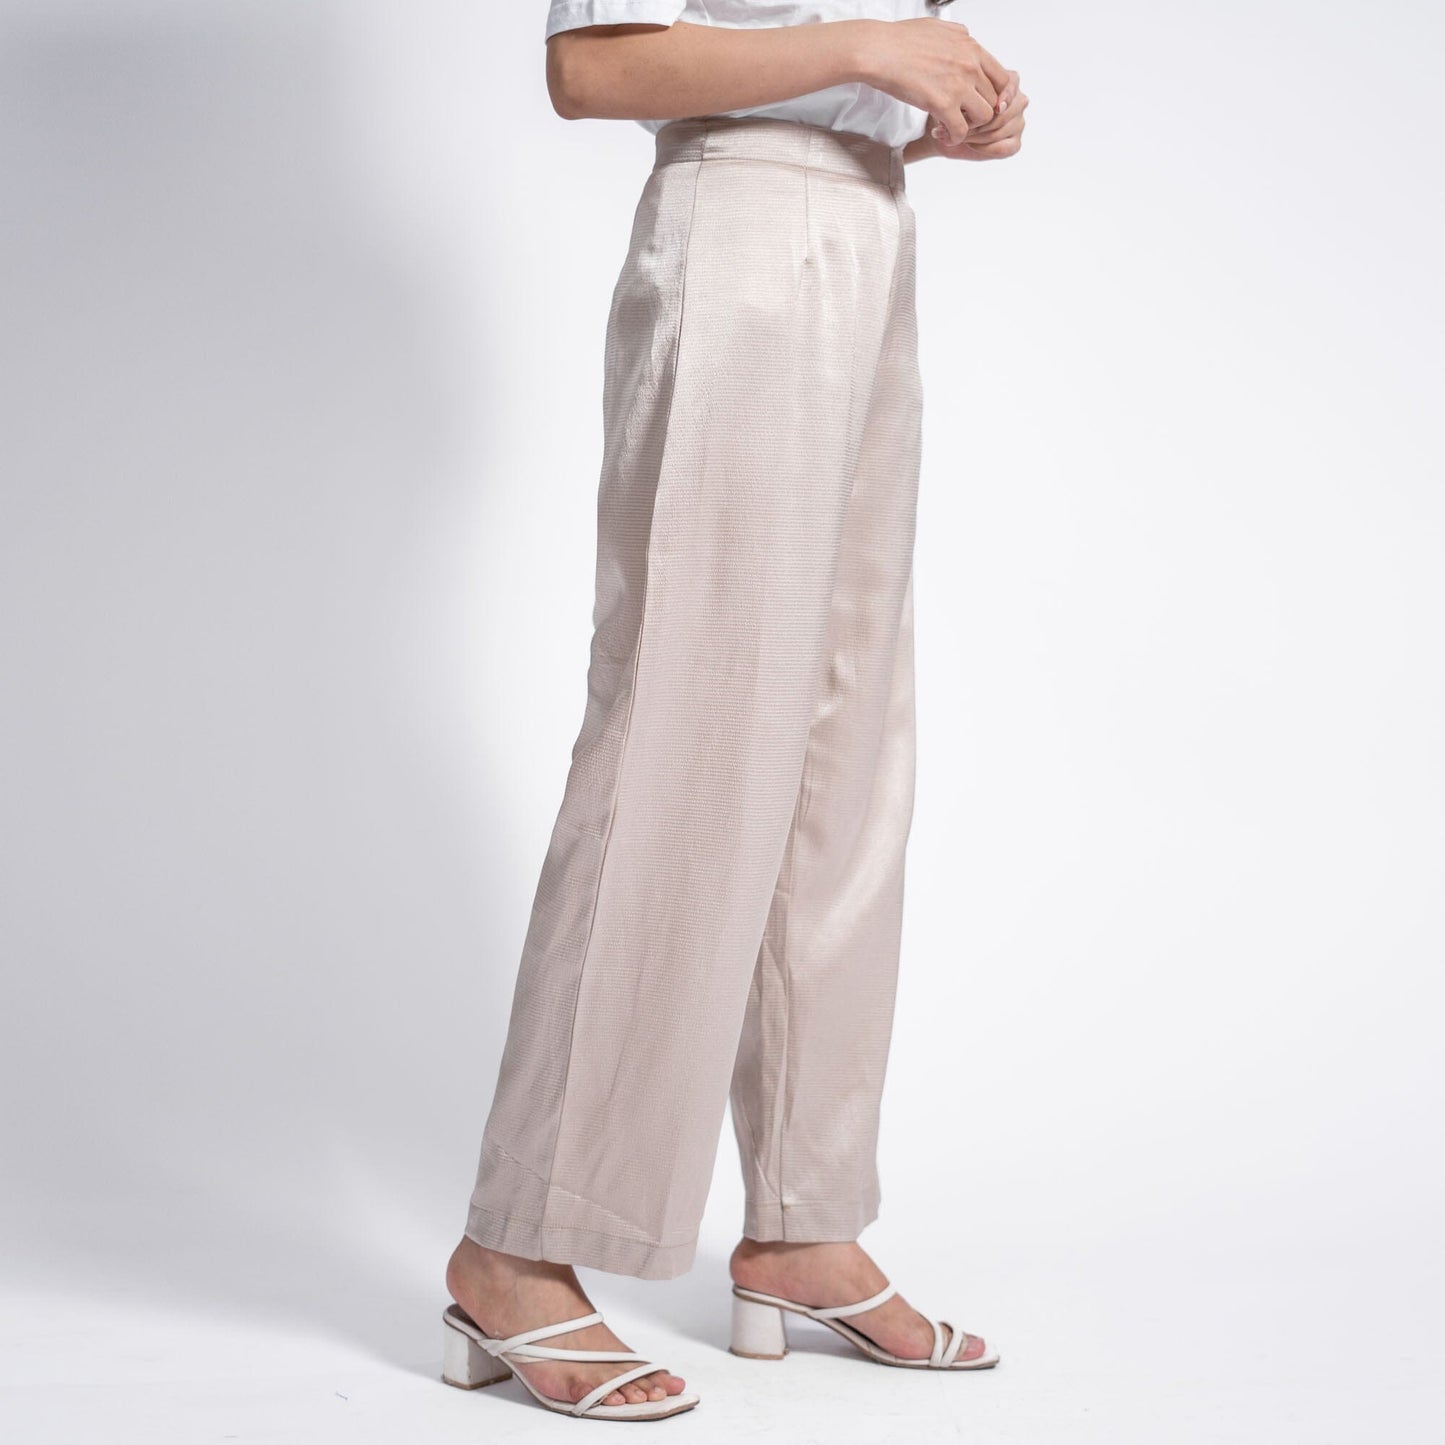 East West By Polo Republica Women's Loose Fit Trousers Women's Trousers East West 